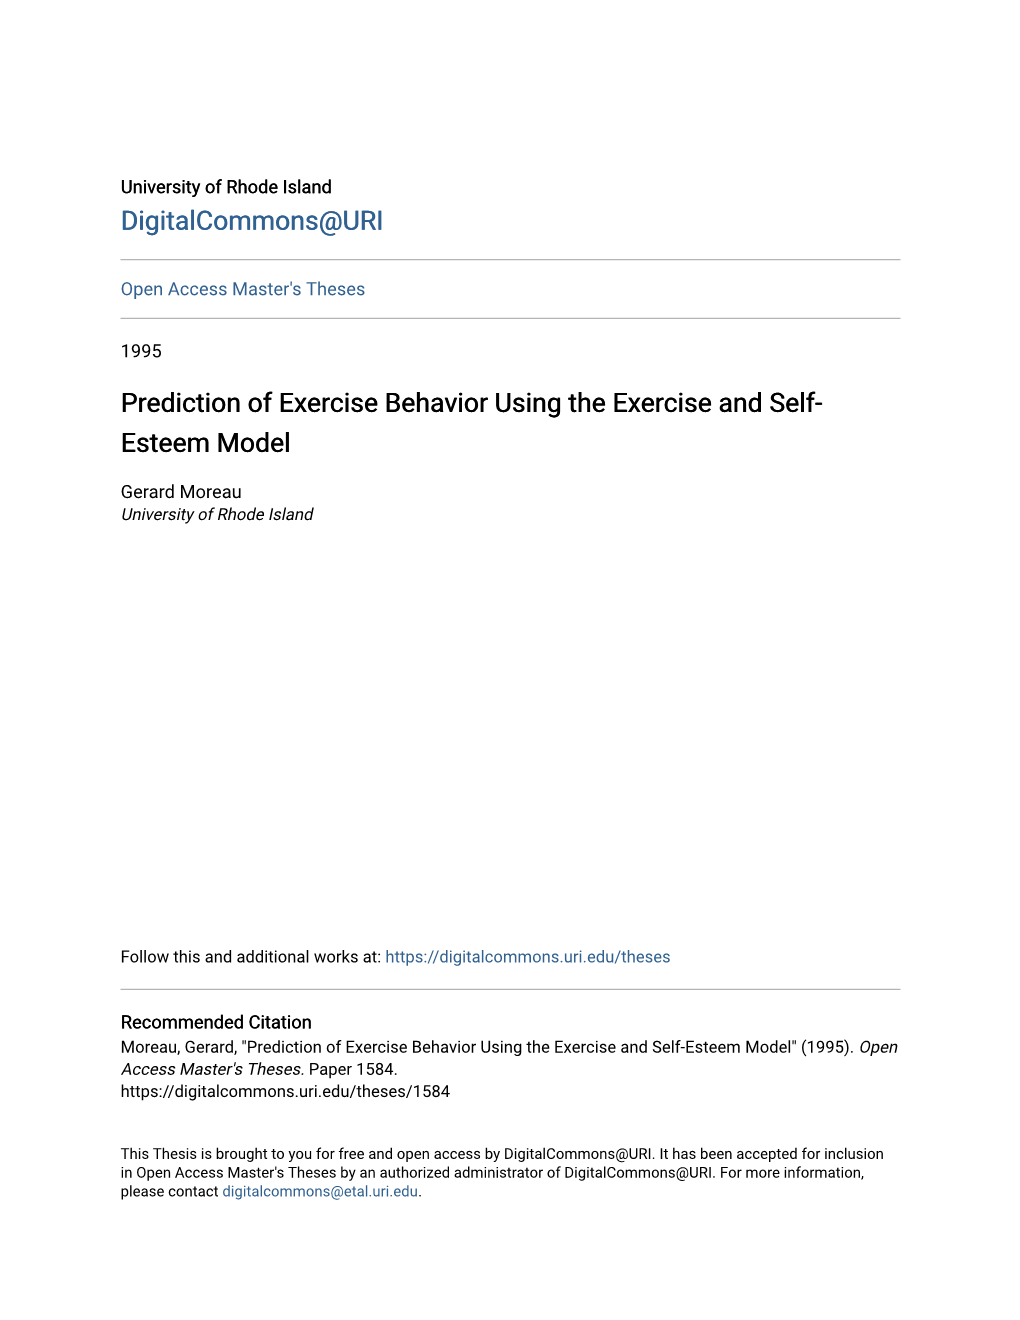 Prediction of Exercise Behavior Using the Exercise and Self-Esteem Model" (1995)